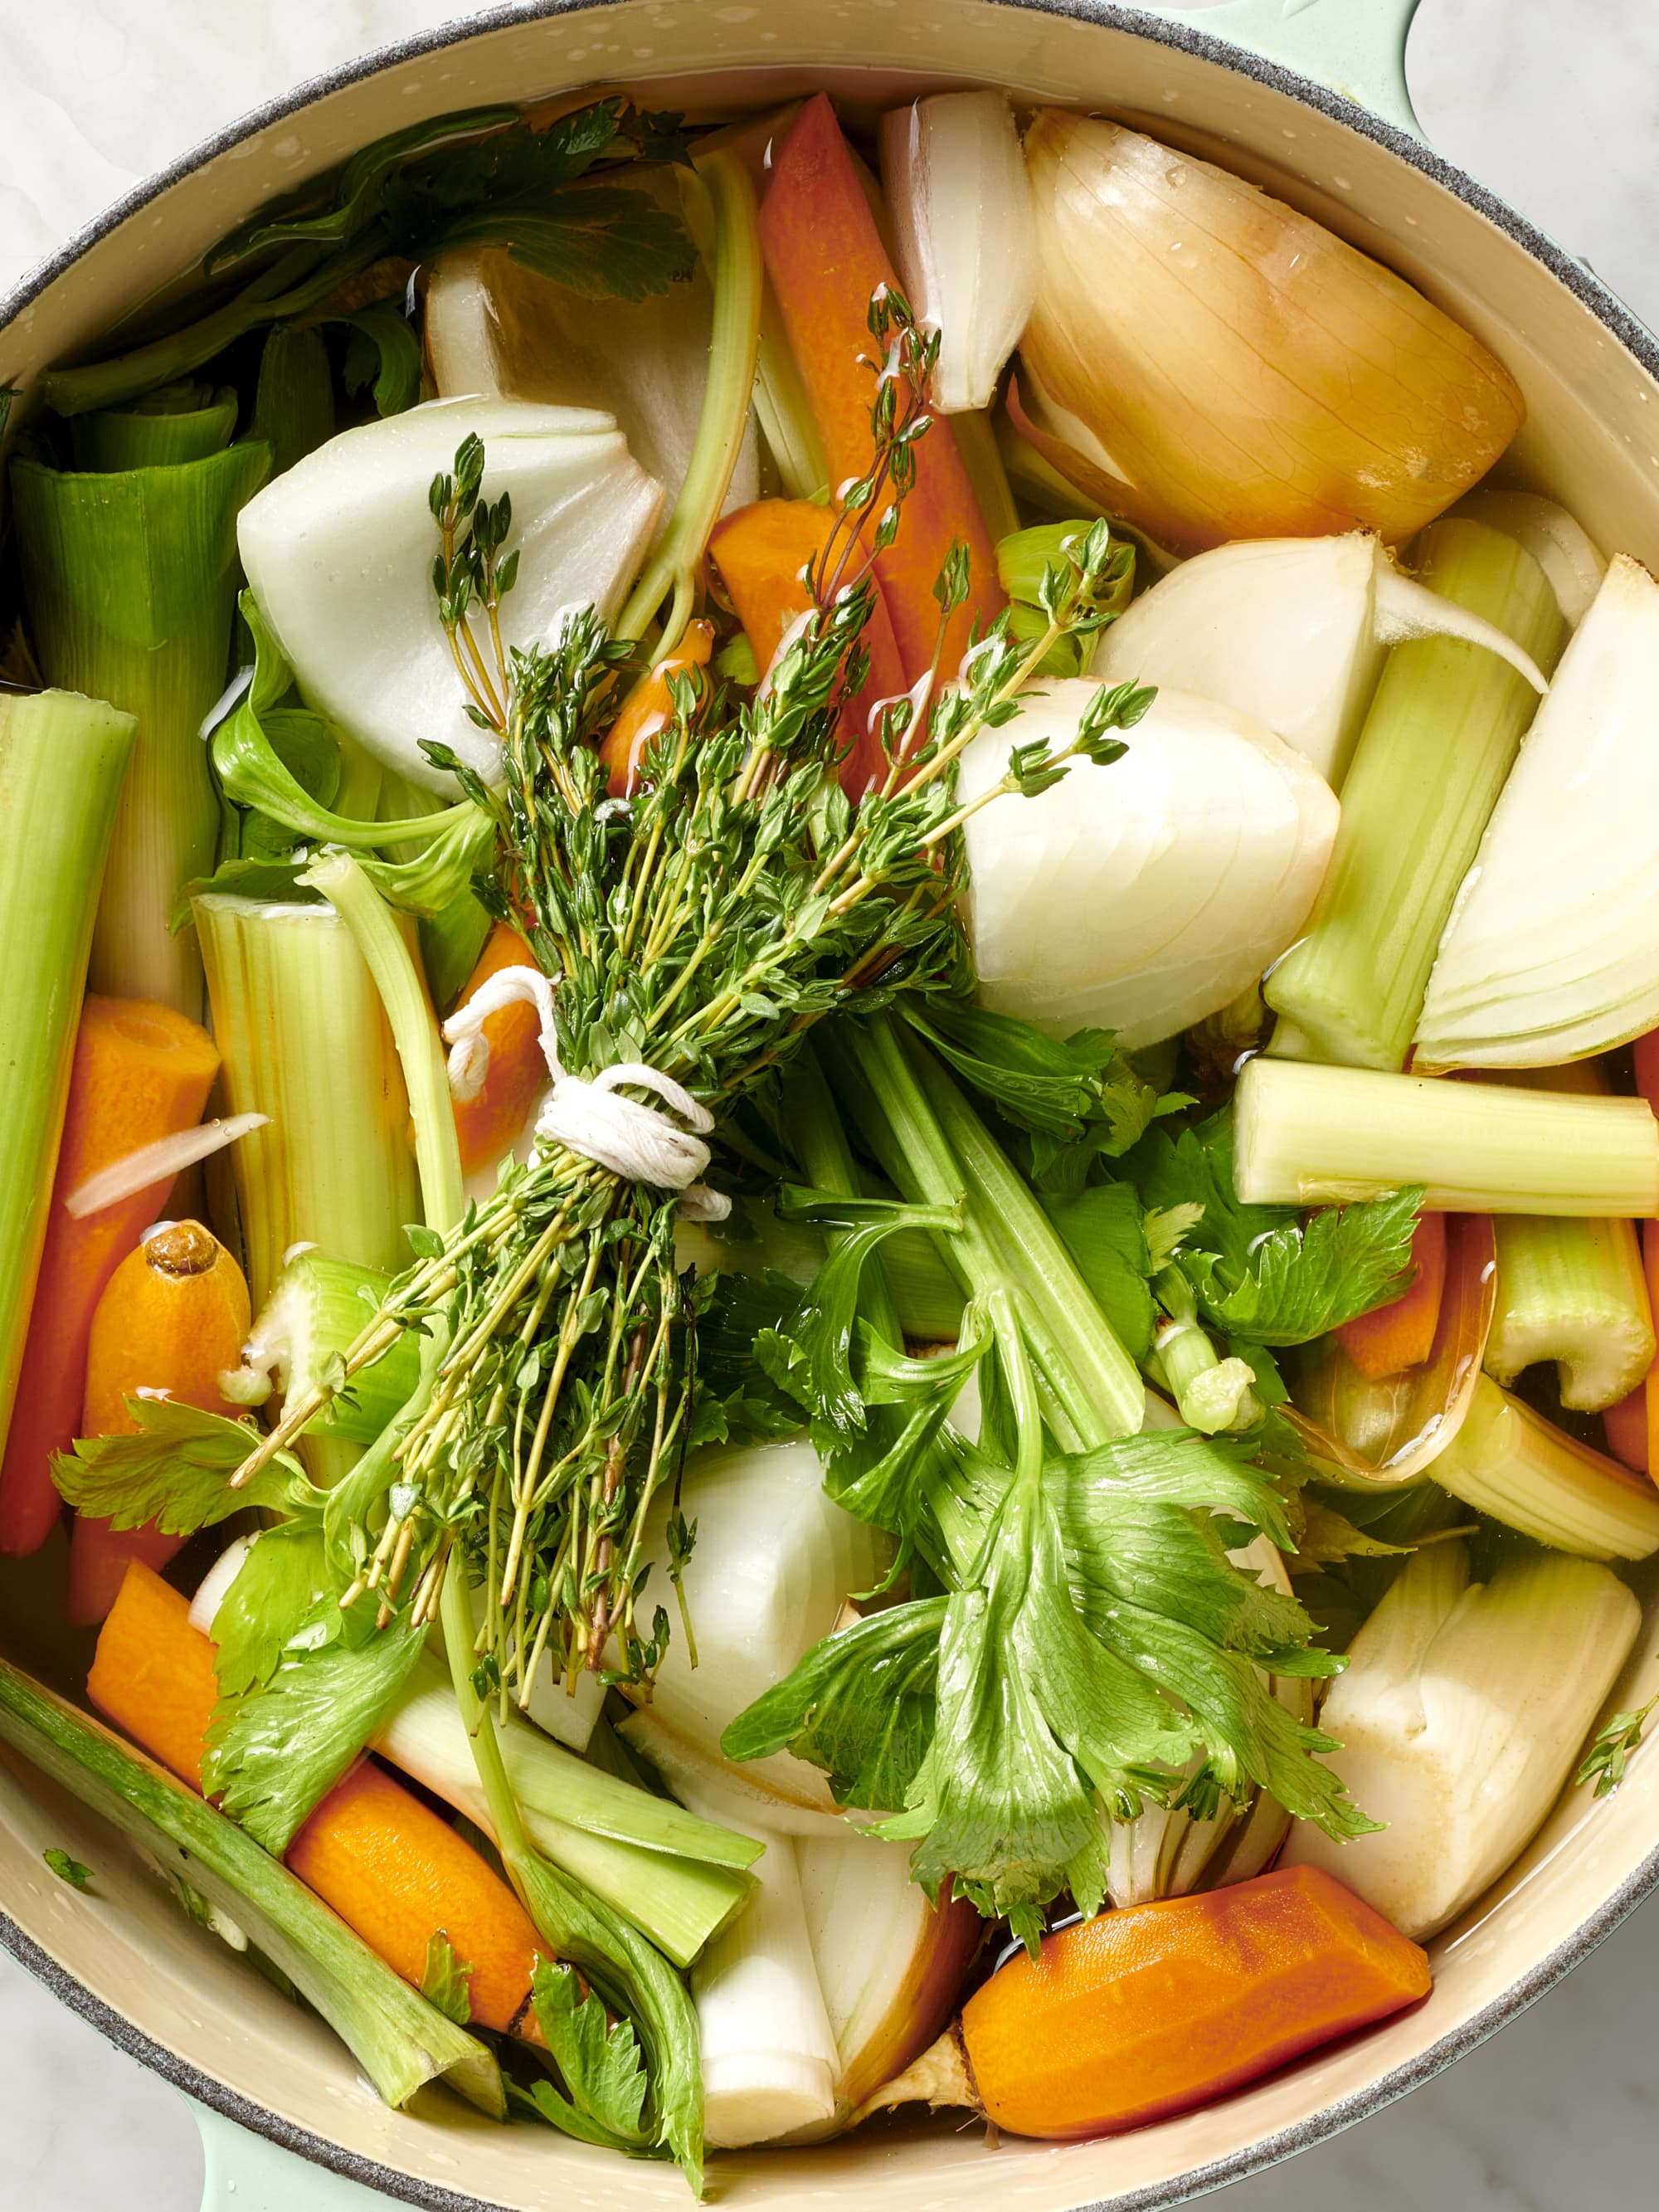 What To Consider When Selecting A Pot For Making Soup